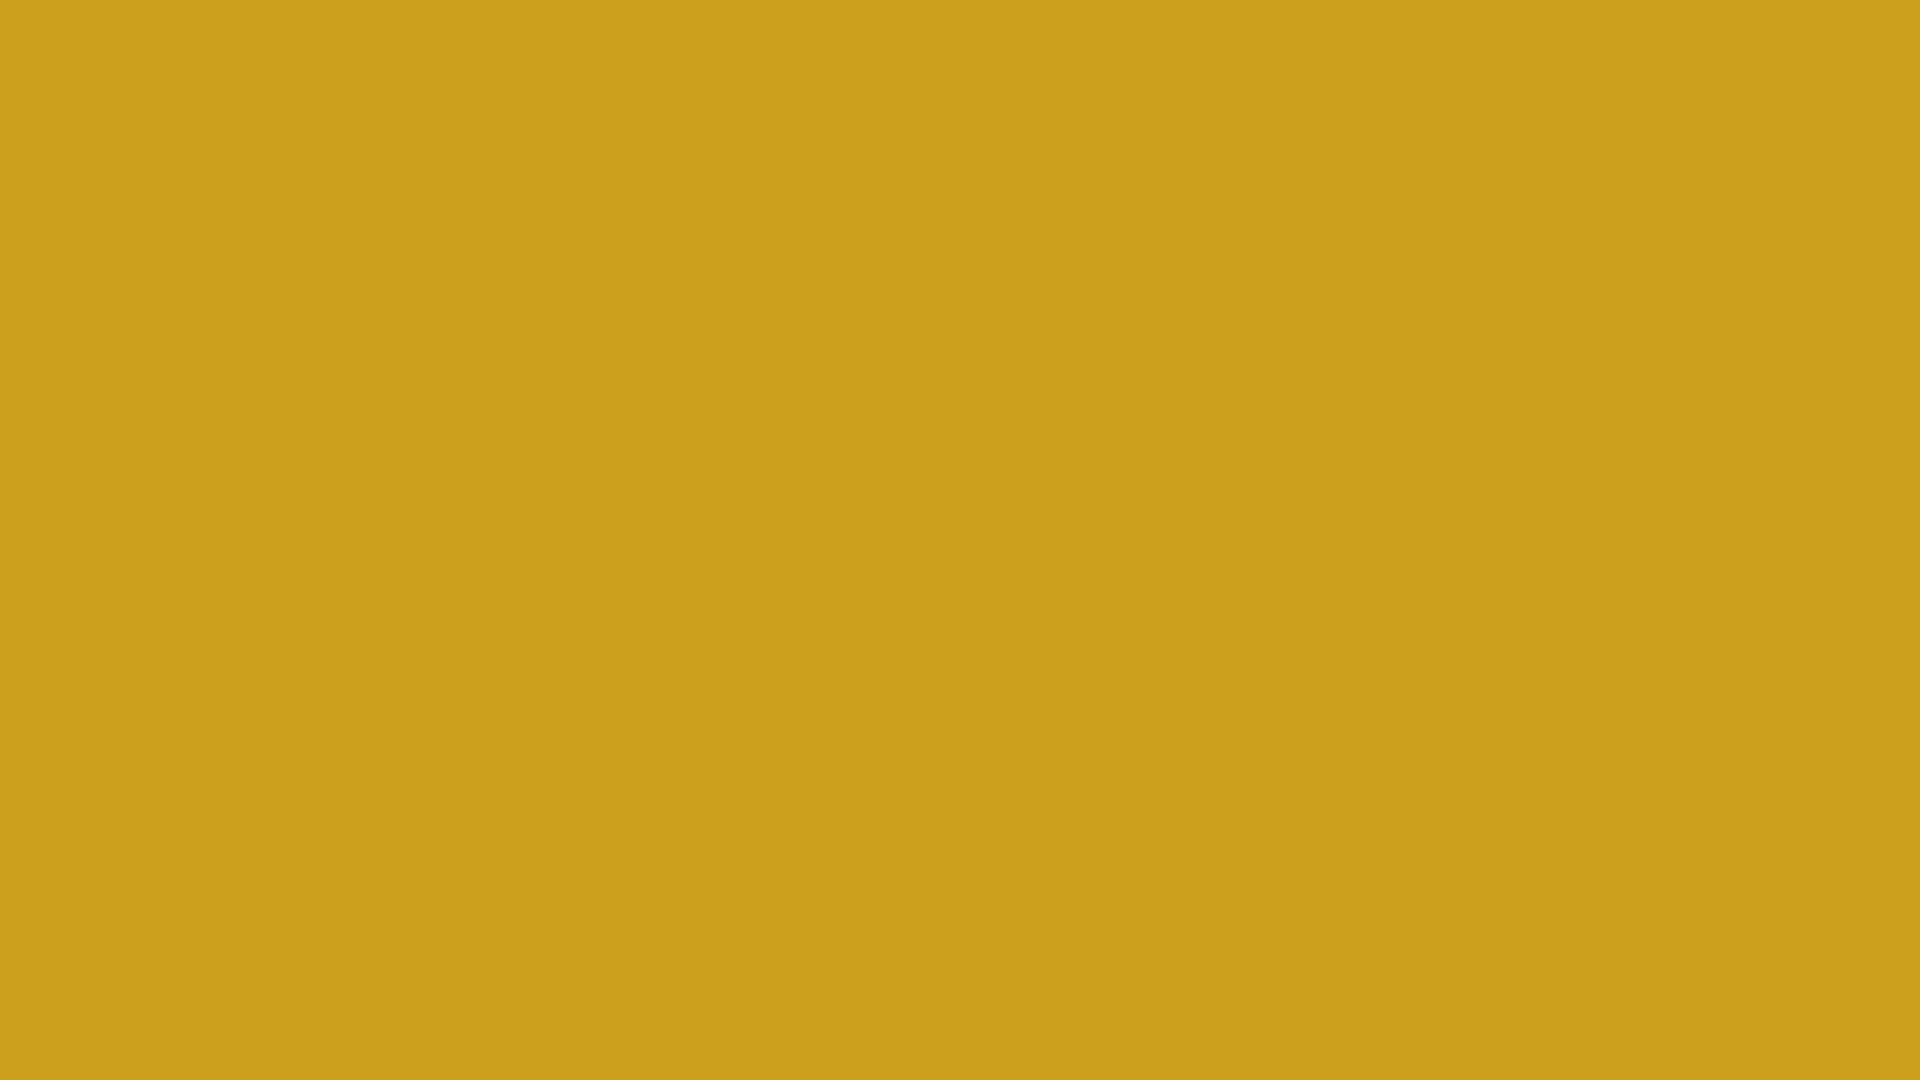 1920x1080 Lemon Curry Solid Color Background